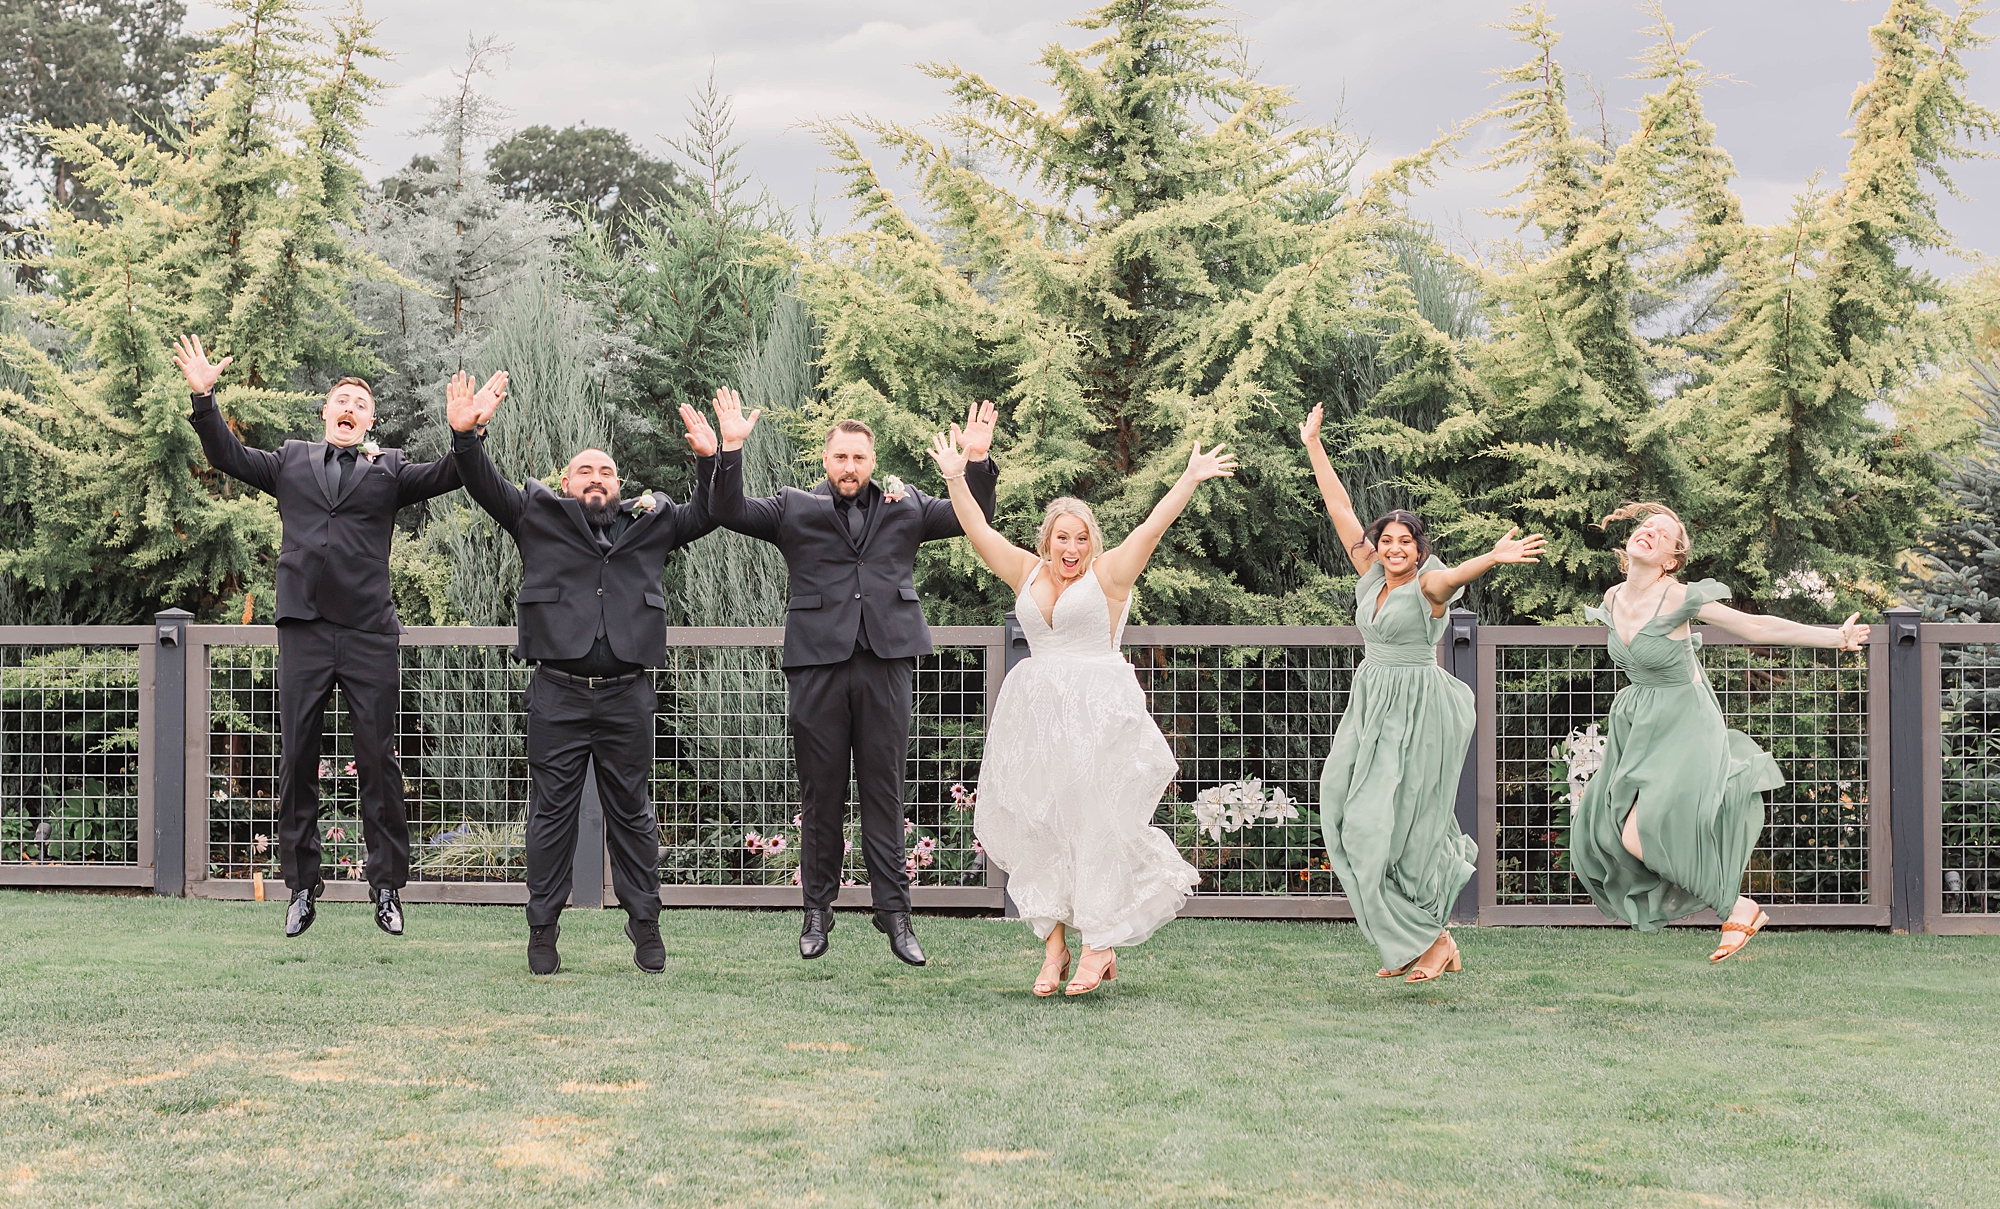 fun wedding party portraits of group jumping in the air